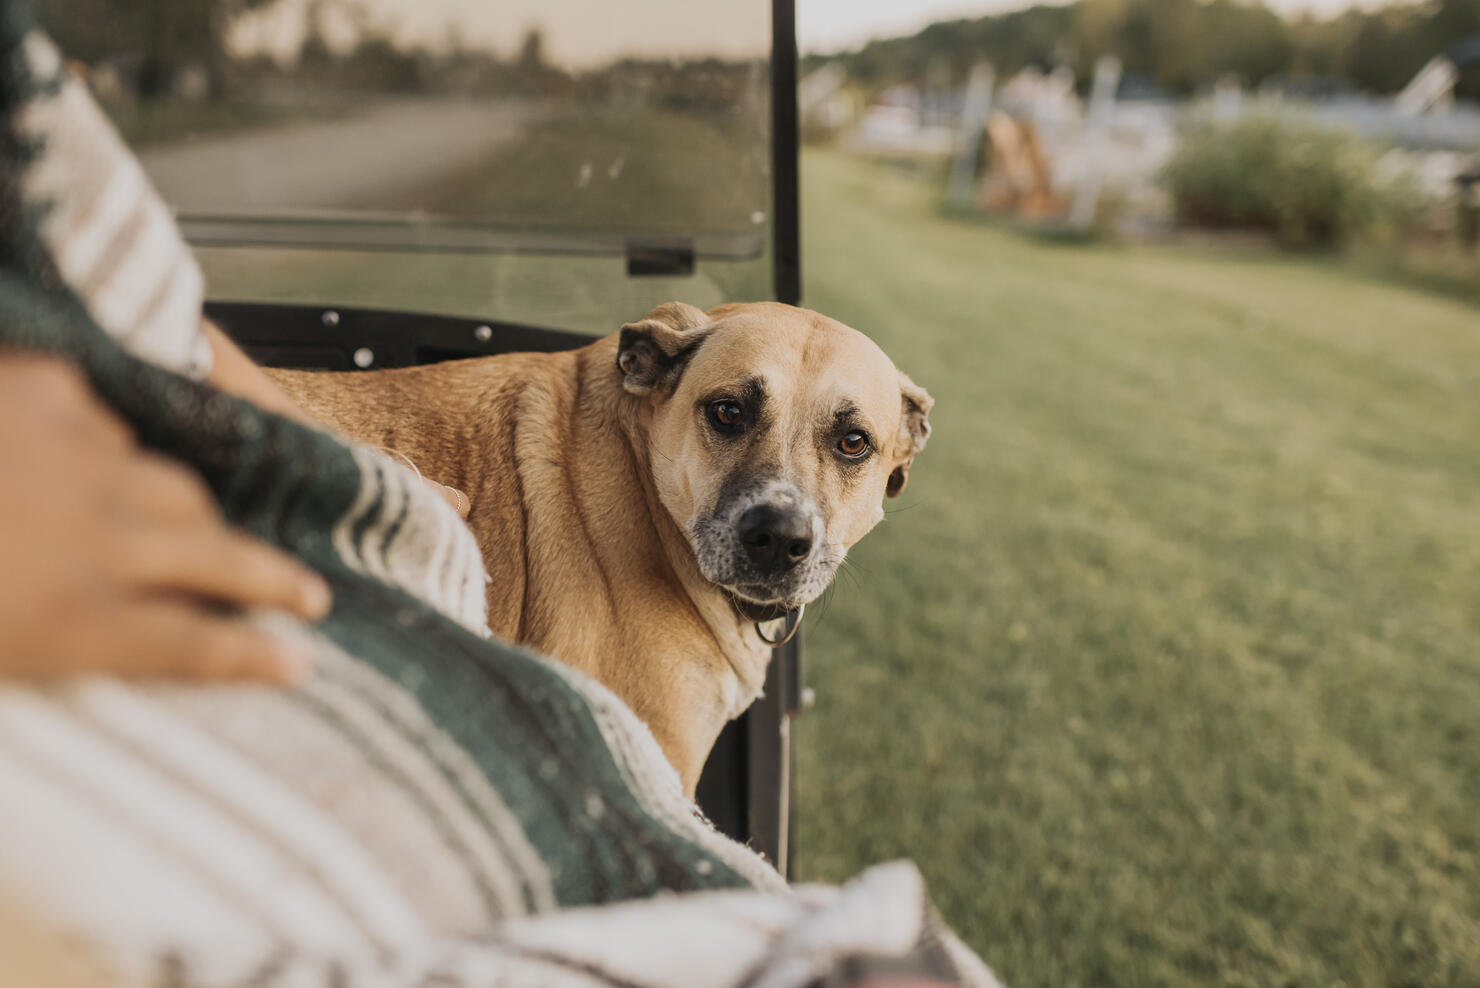 Dog staring while sitting by man in golf cart